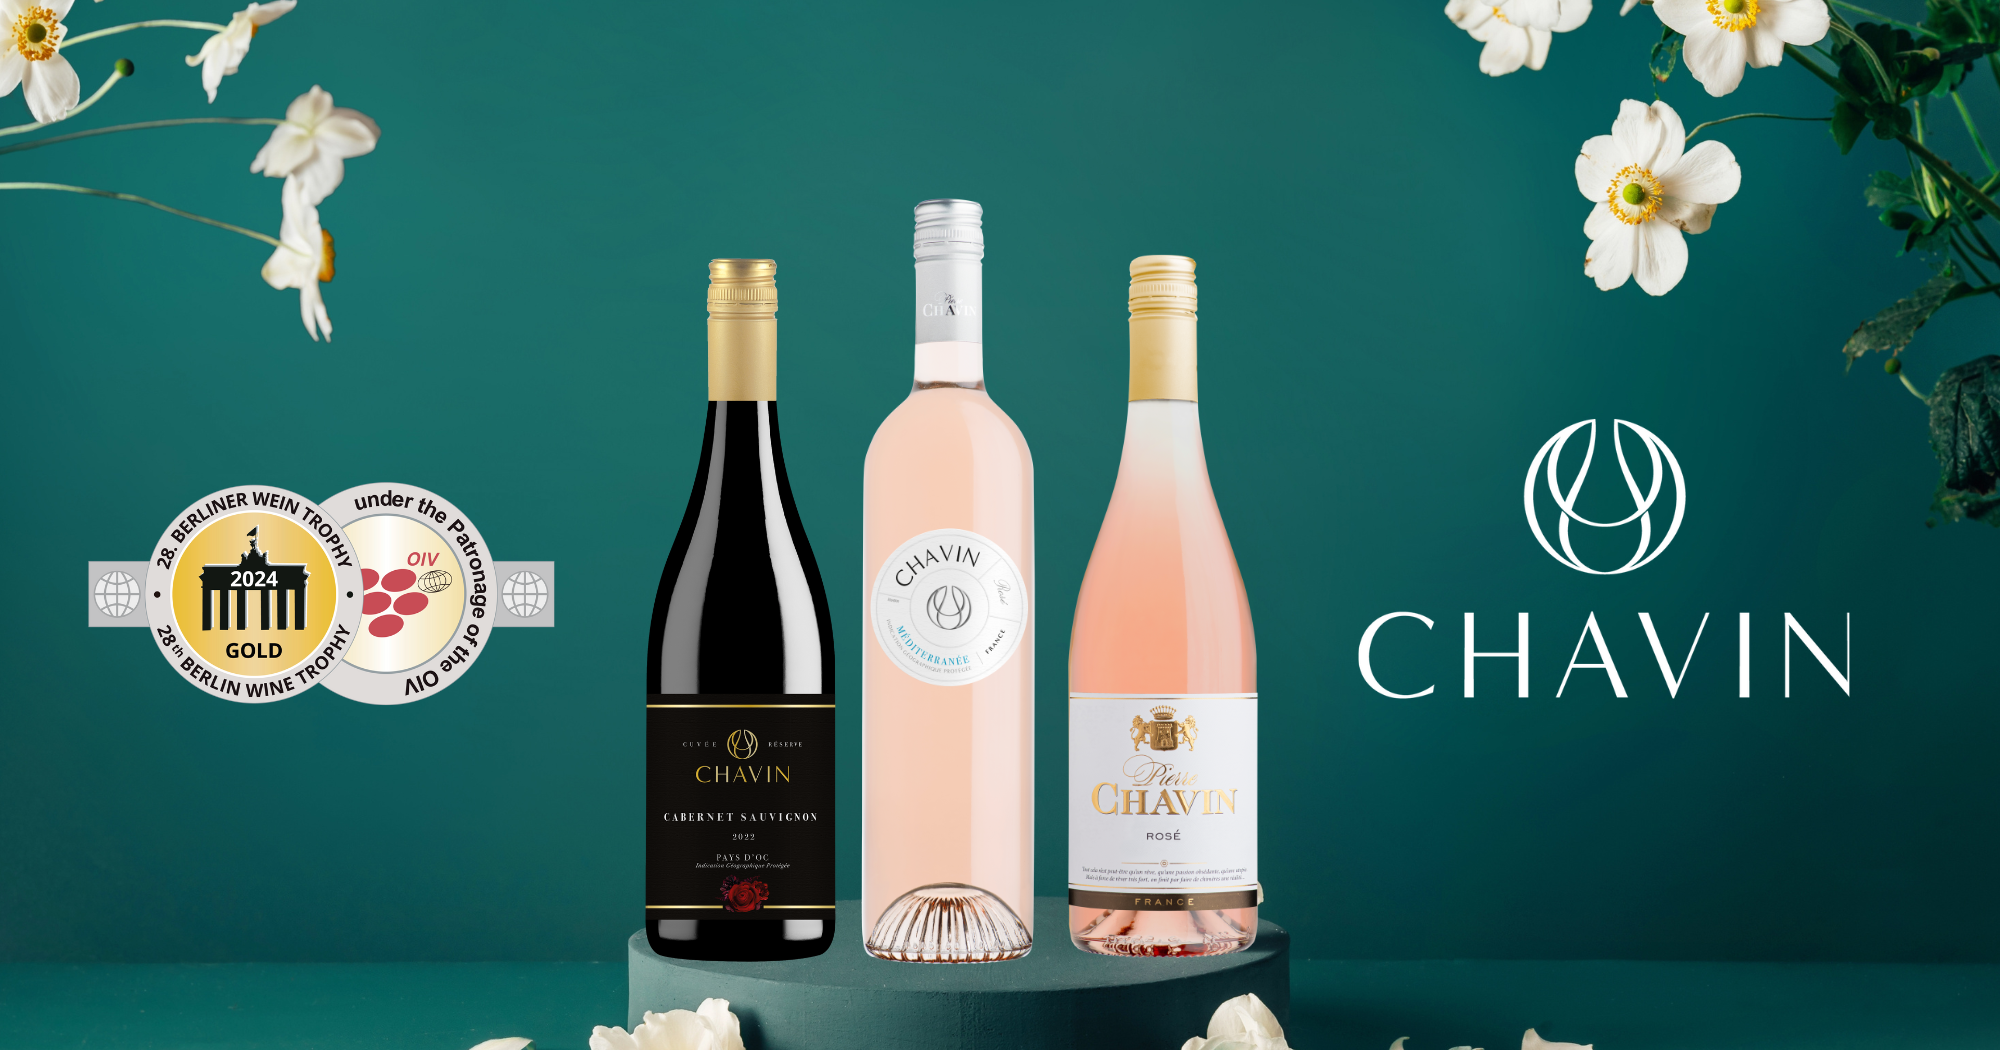 Chavin - Chavin shines with three gold medals at the Berliner Wine Trophy 2024